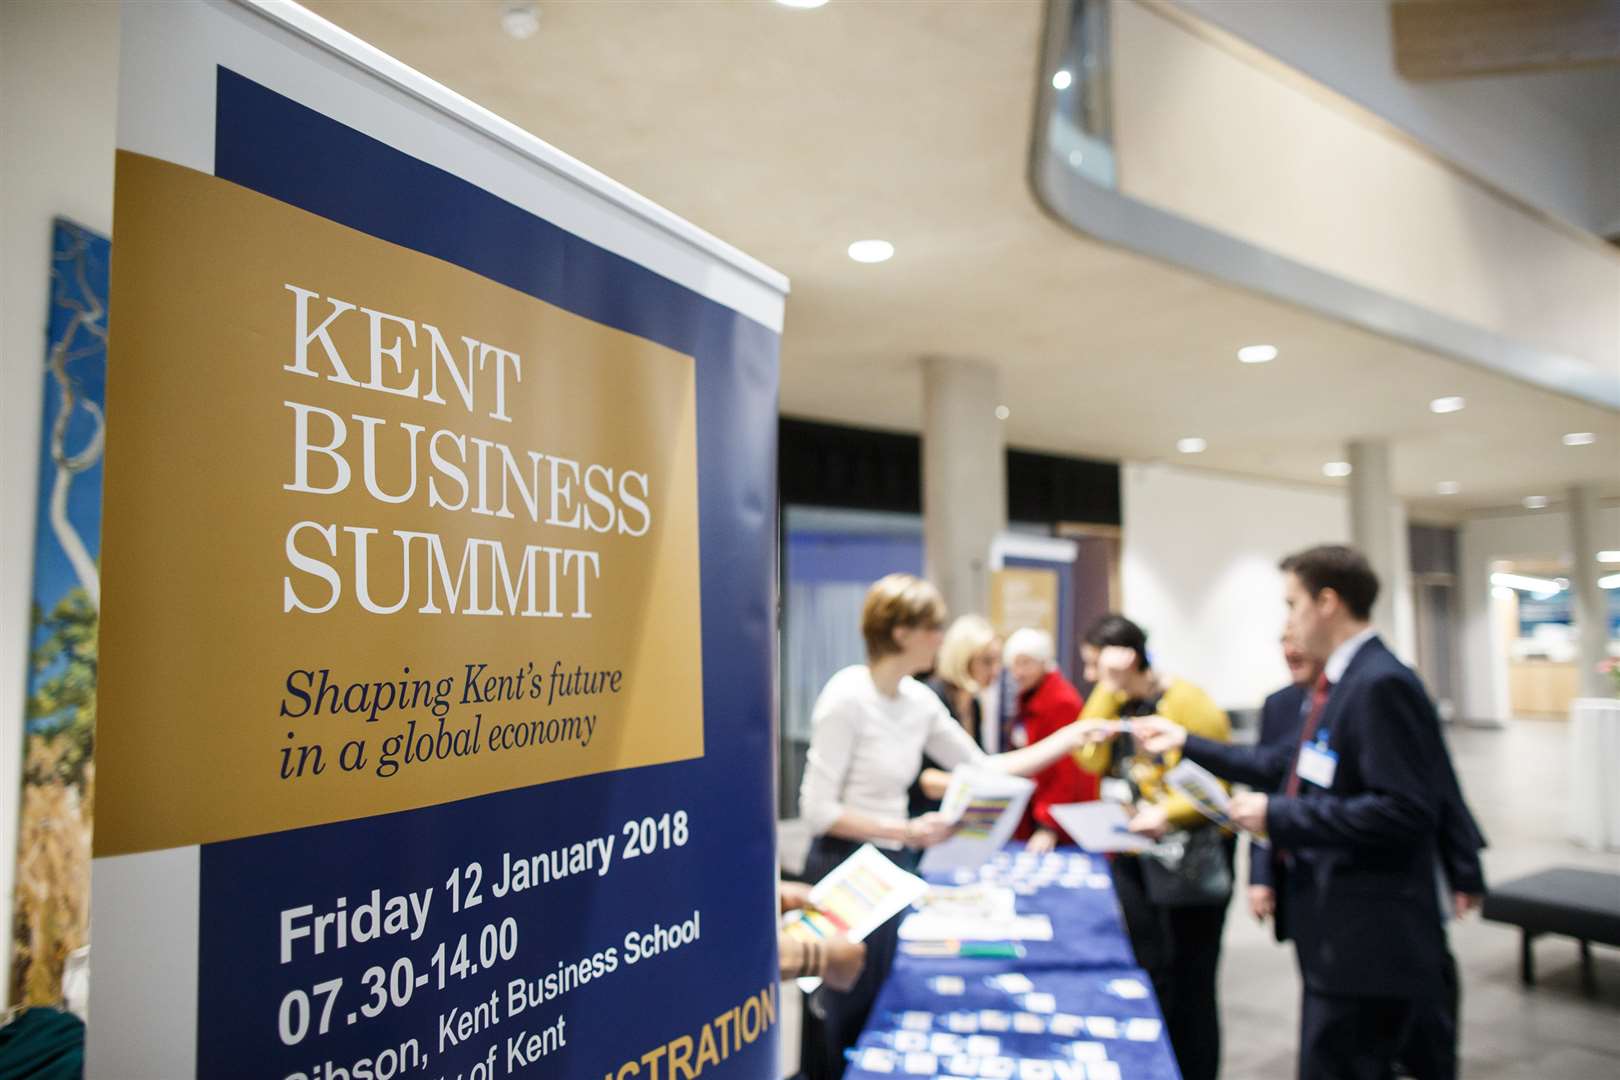 Kent Business Summit was held at Kent Business School in Canterbury